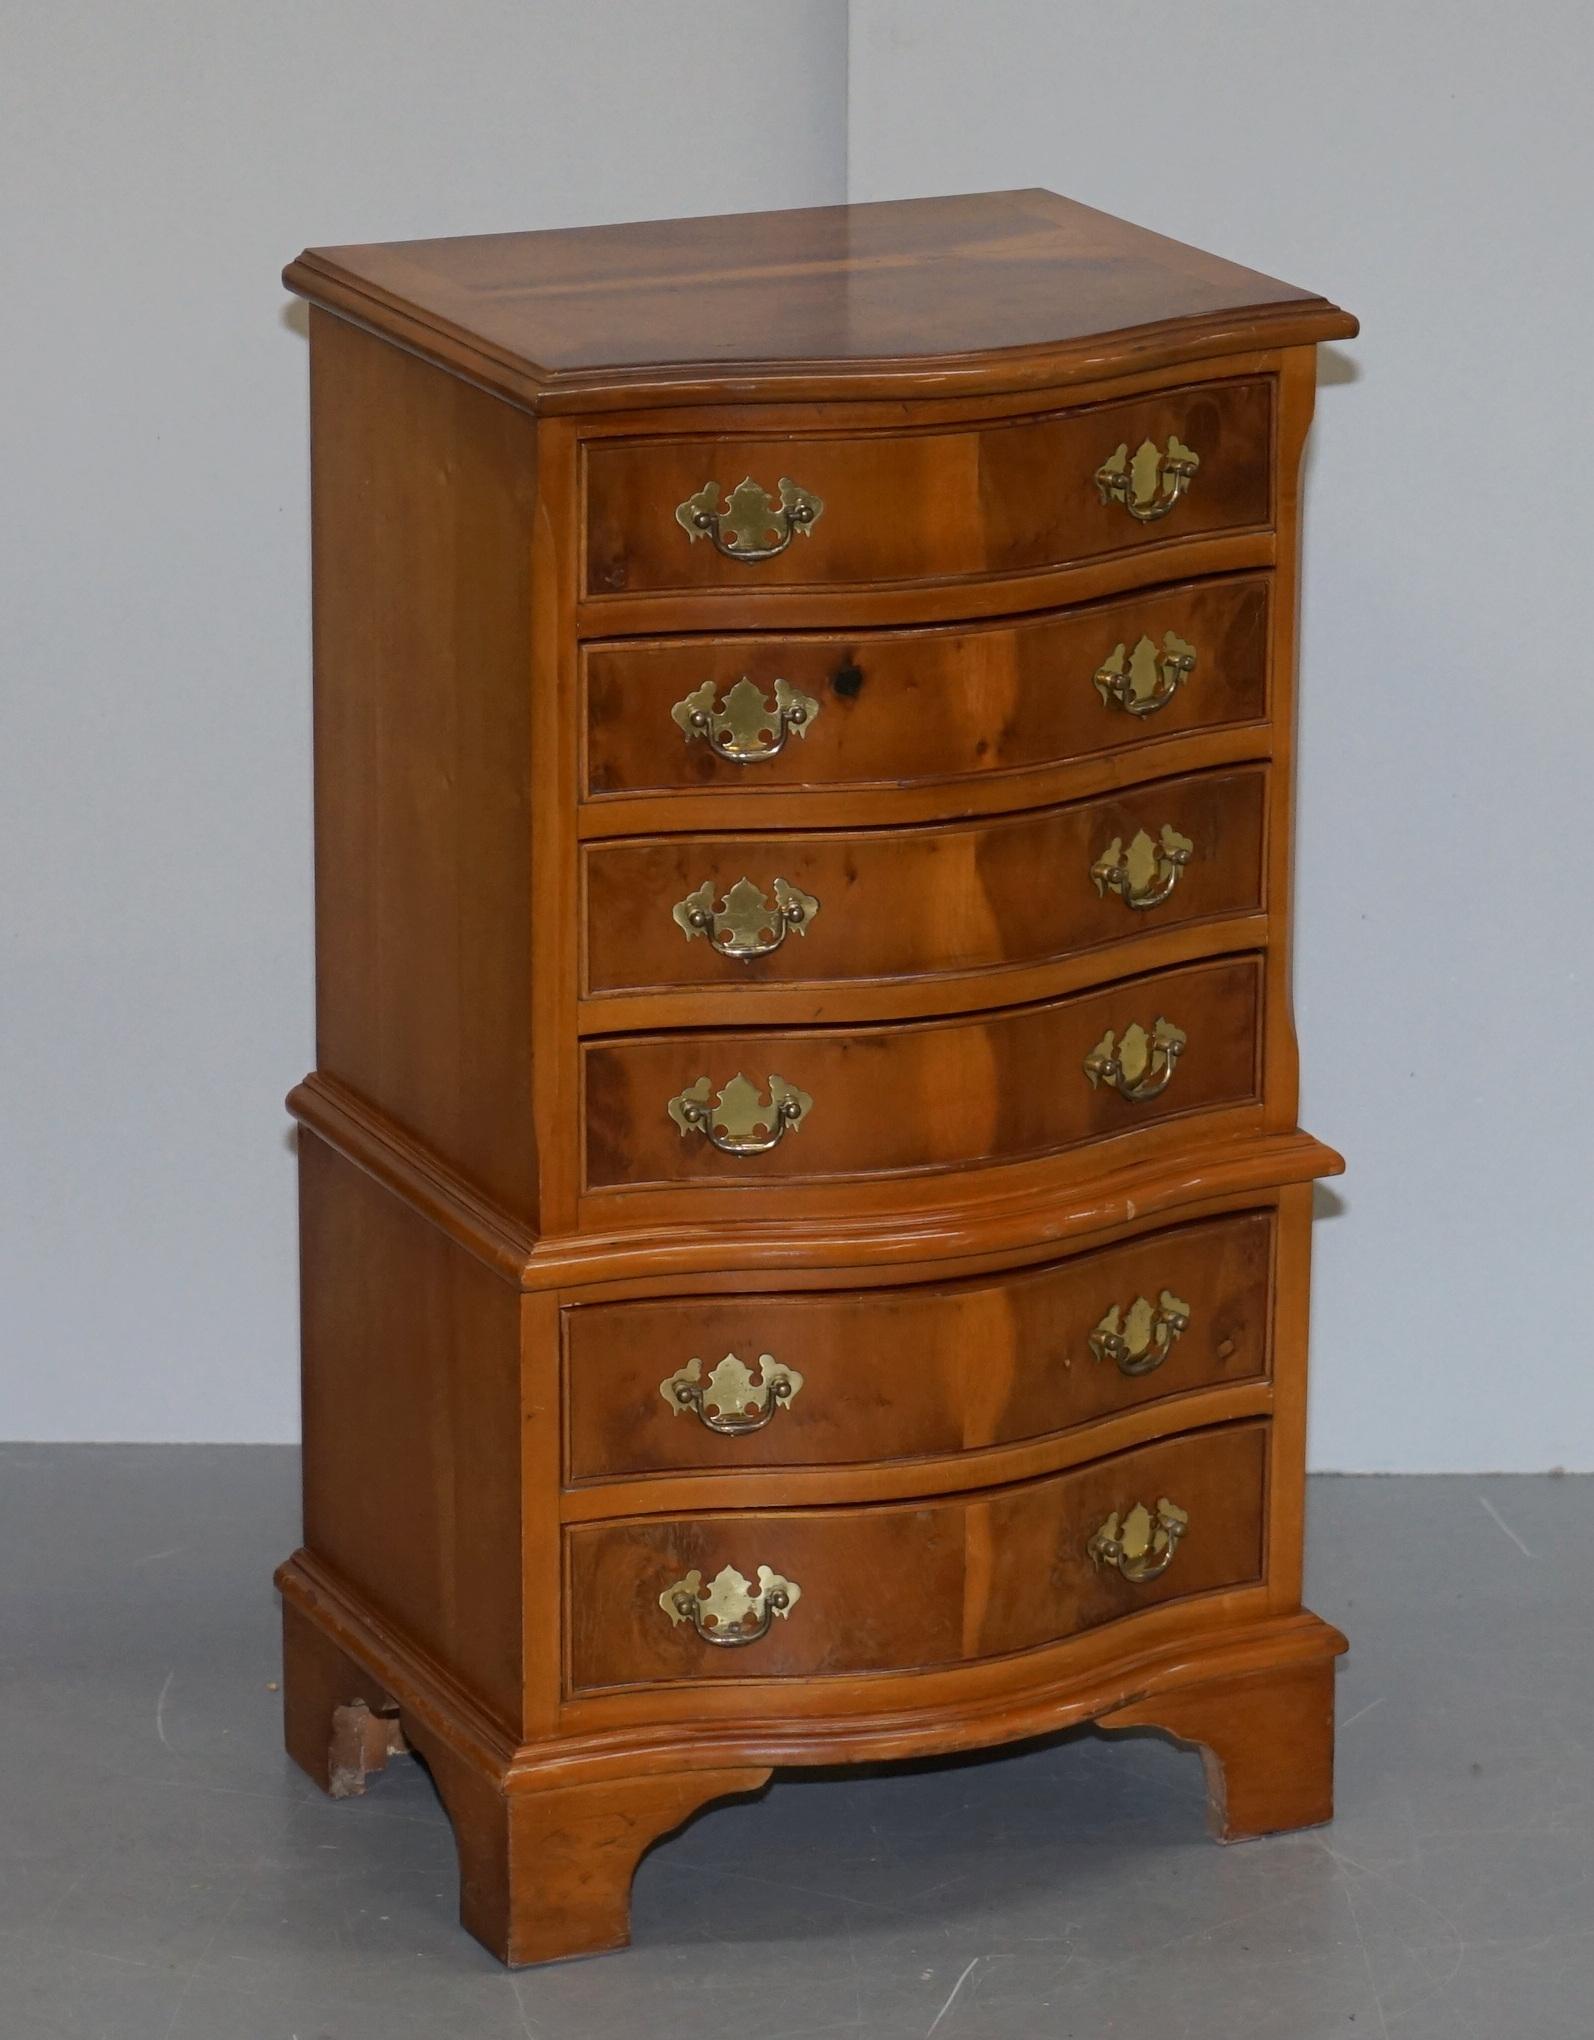 We are delighted to offer for sale this lovely pair of vintage Burr Yew wood tall boy chests of drawers

These are large side table sized, not full huge bedroom tall boys, these are designed to use in a living area with a lamp and a glass of wine